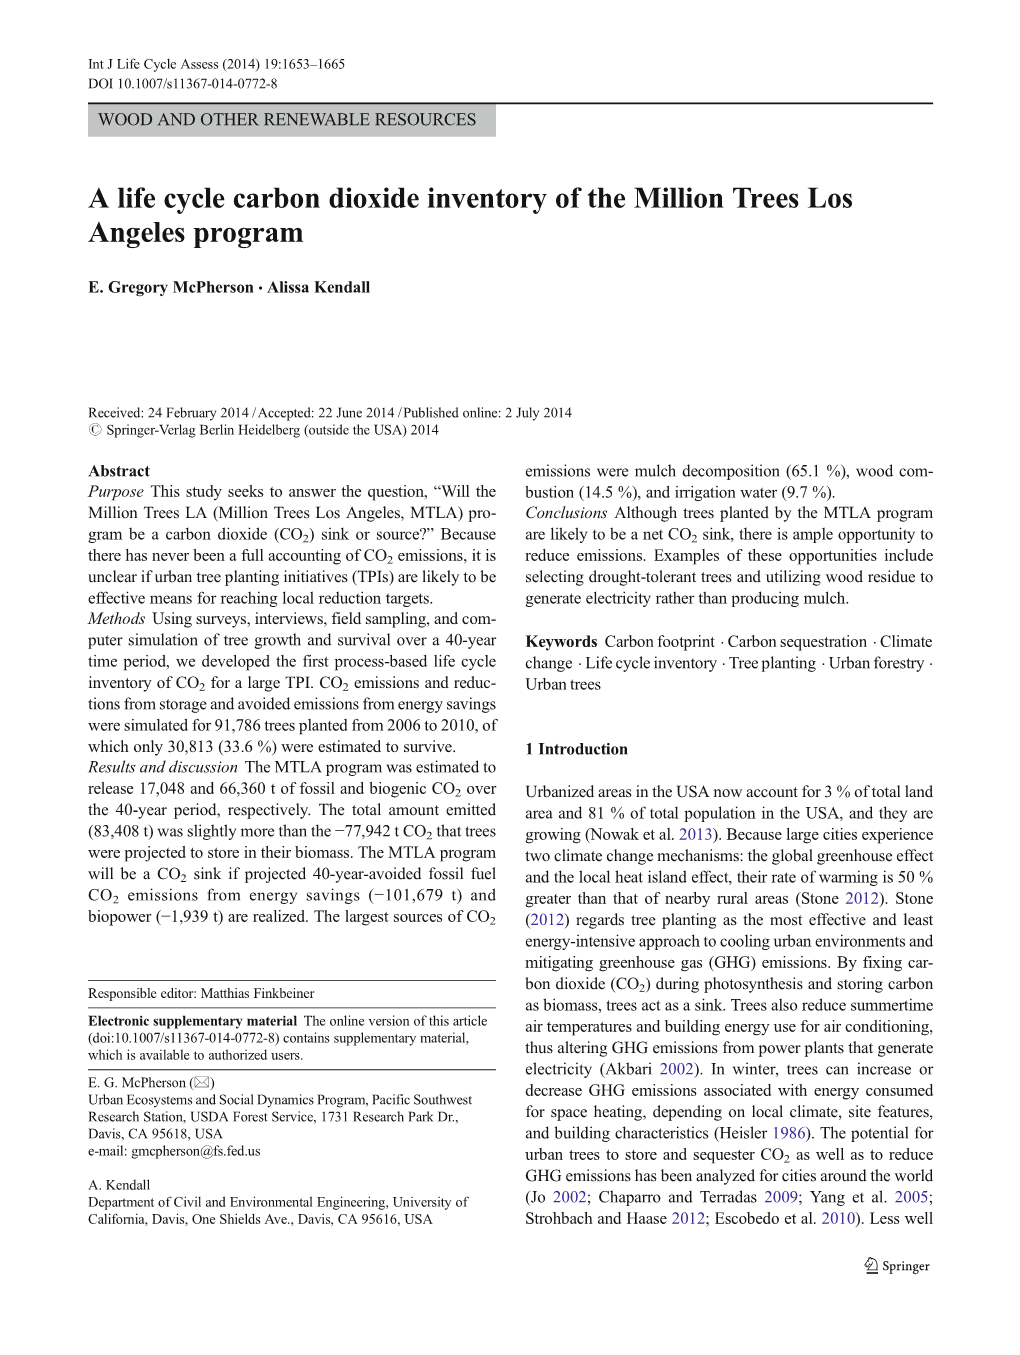 A Life Cycle Carbon Dioxide Inventory of the Million Trees Los Angeles Program